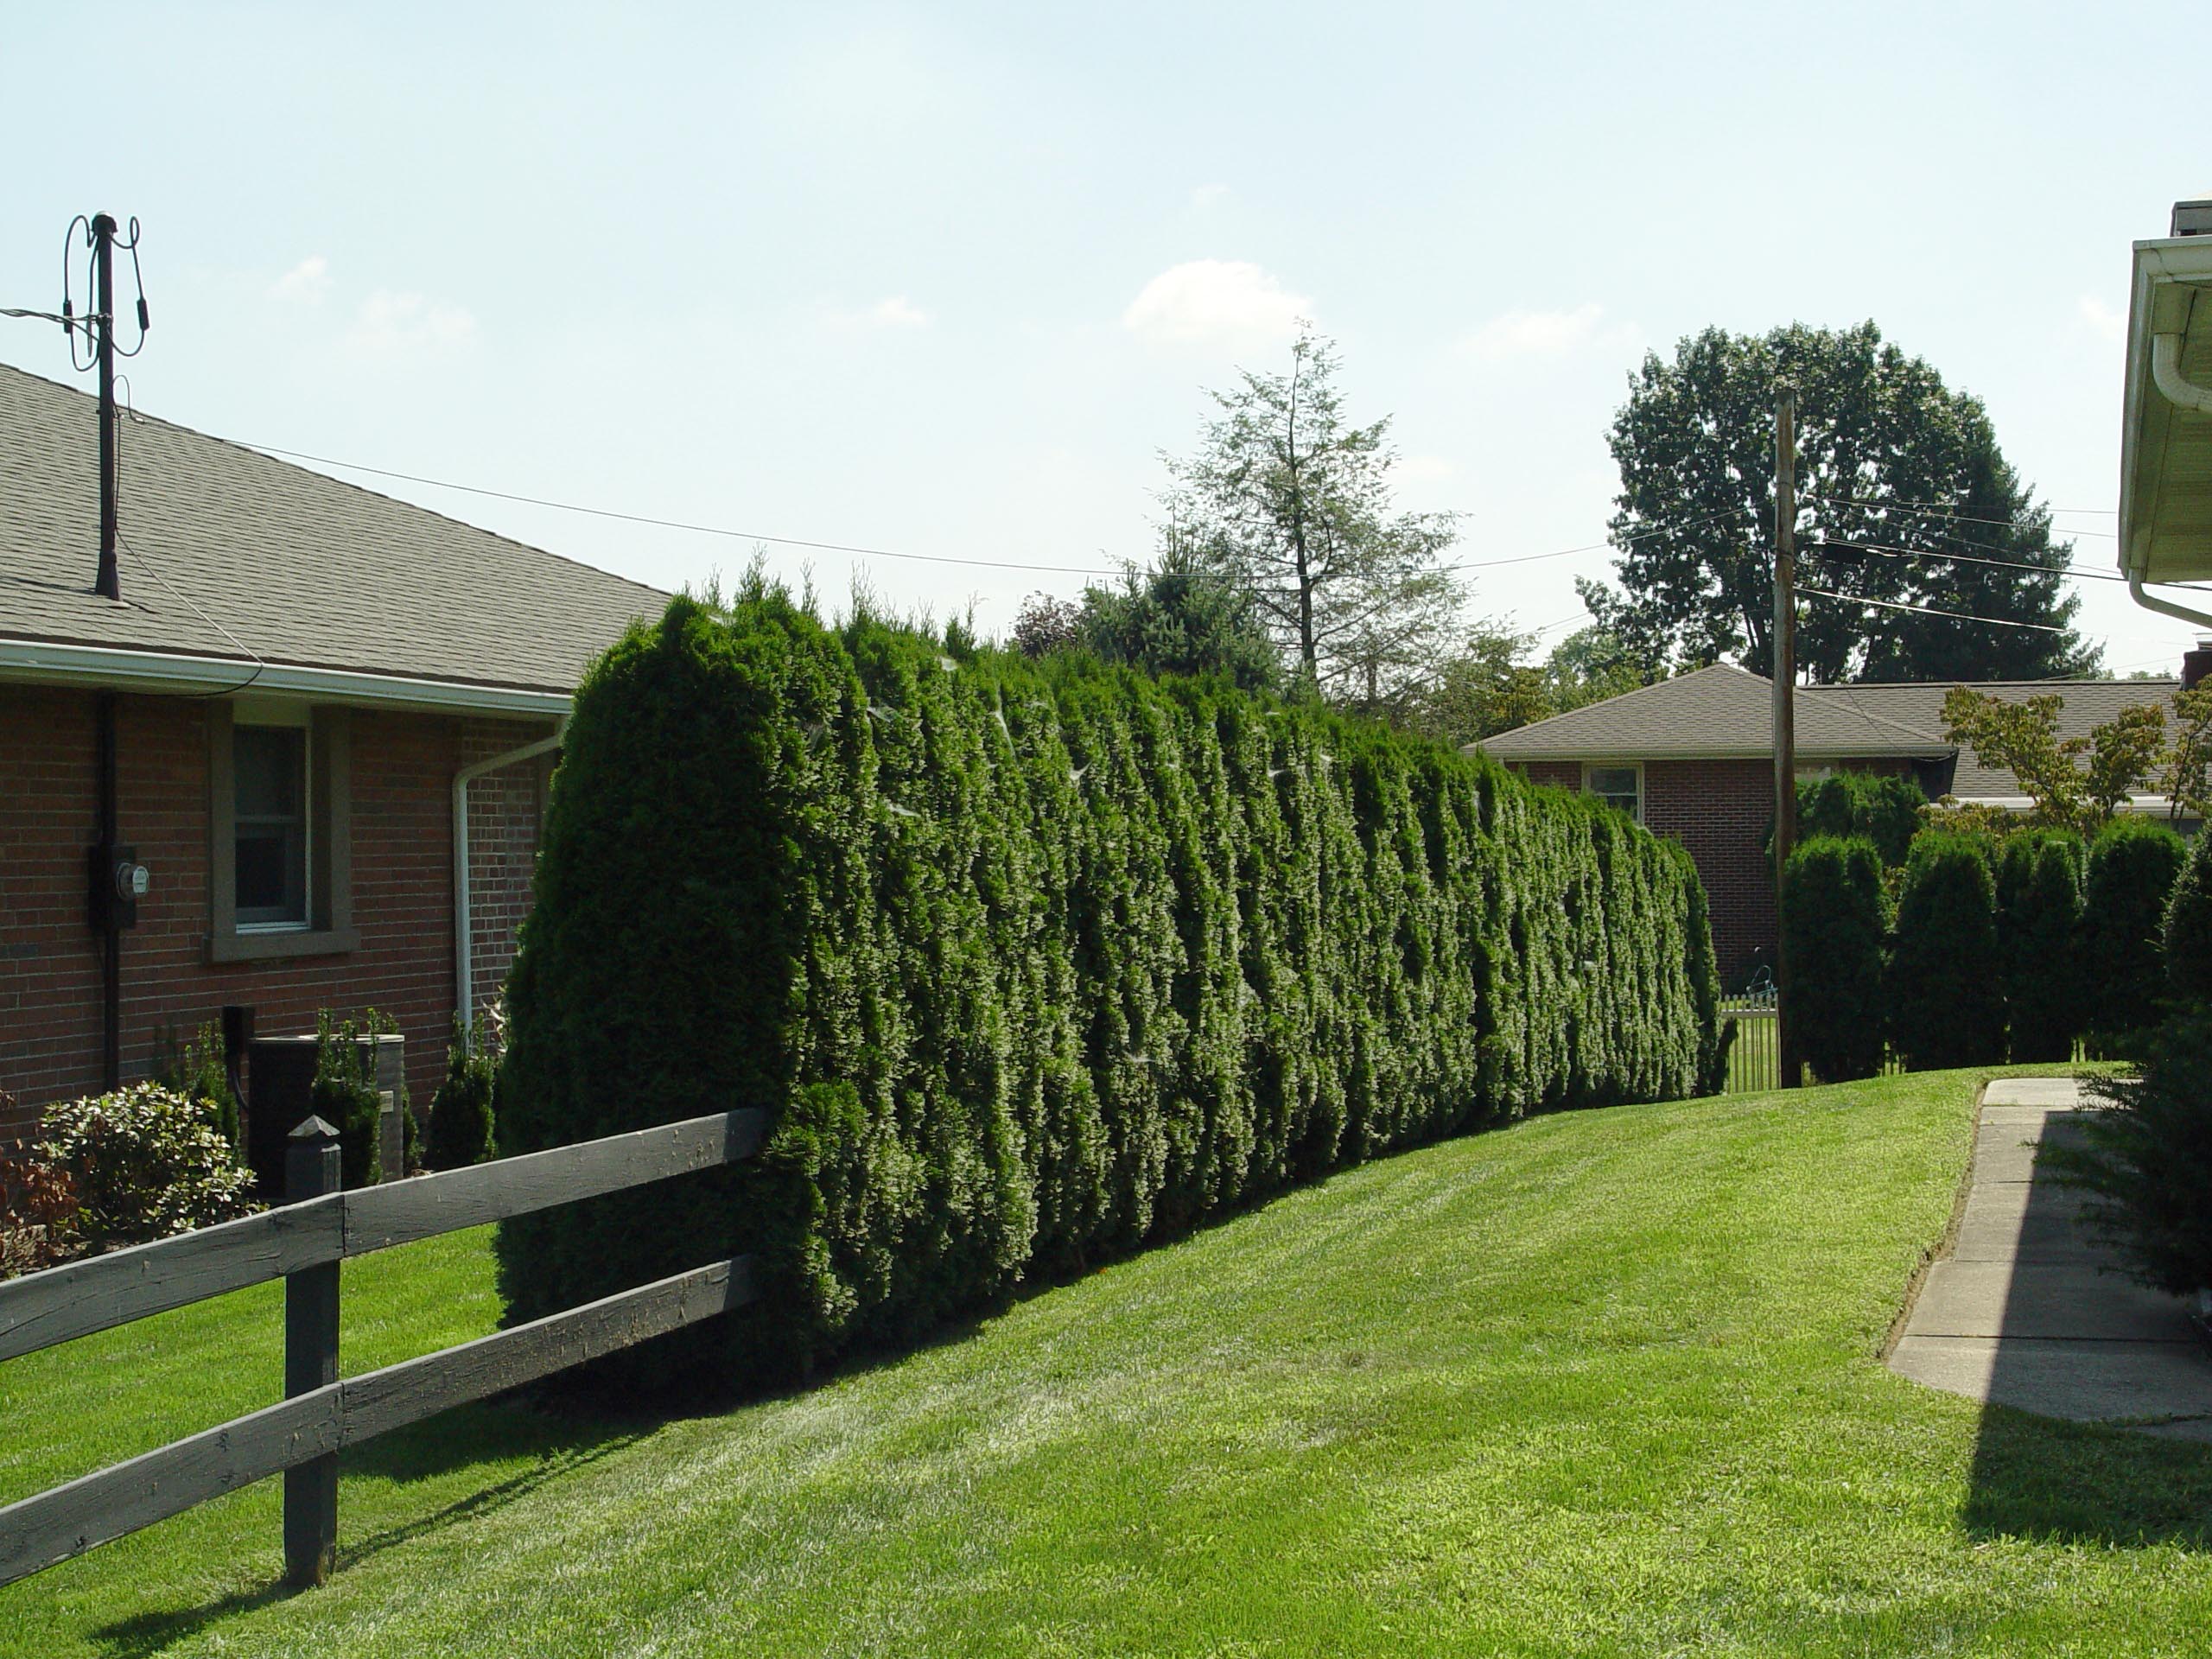 New Privacy Hedges for Living room